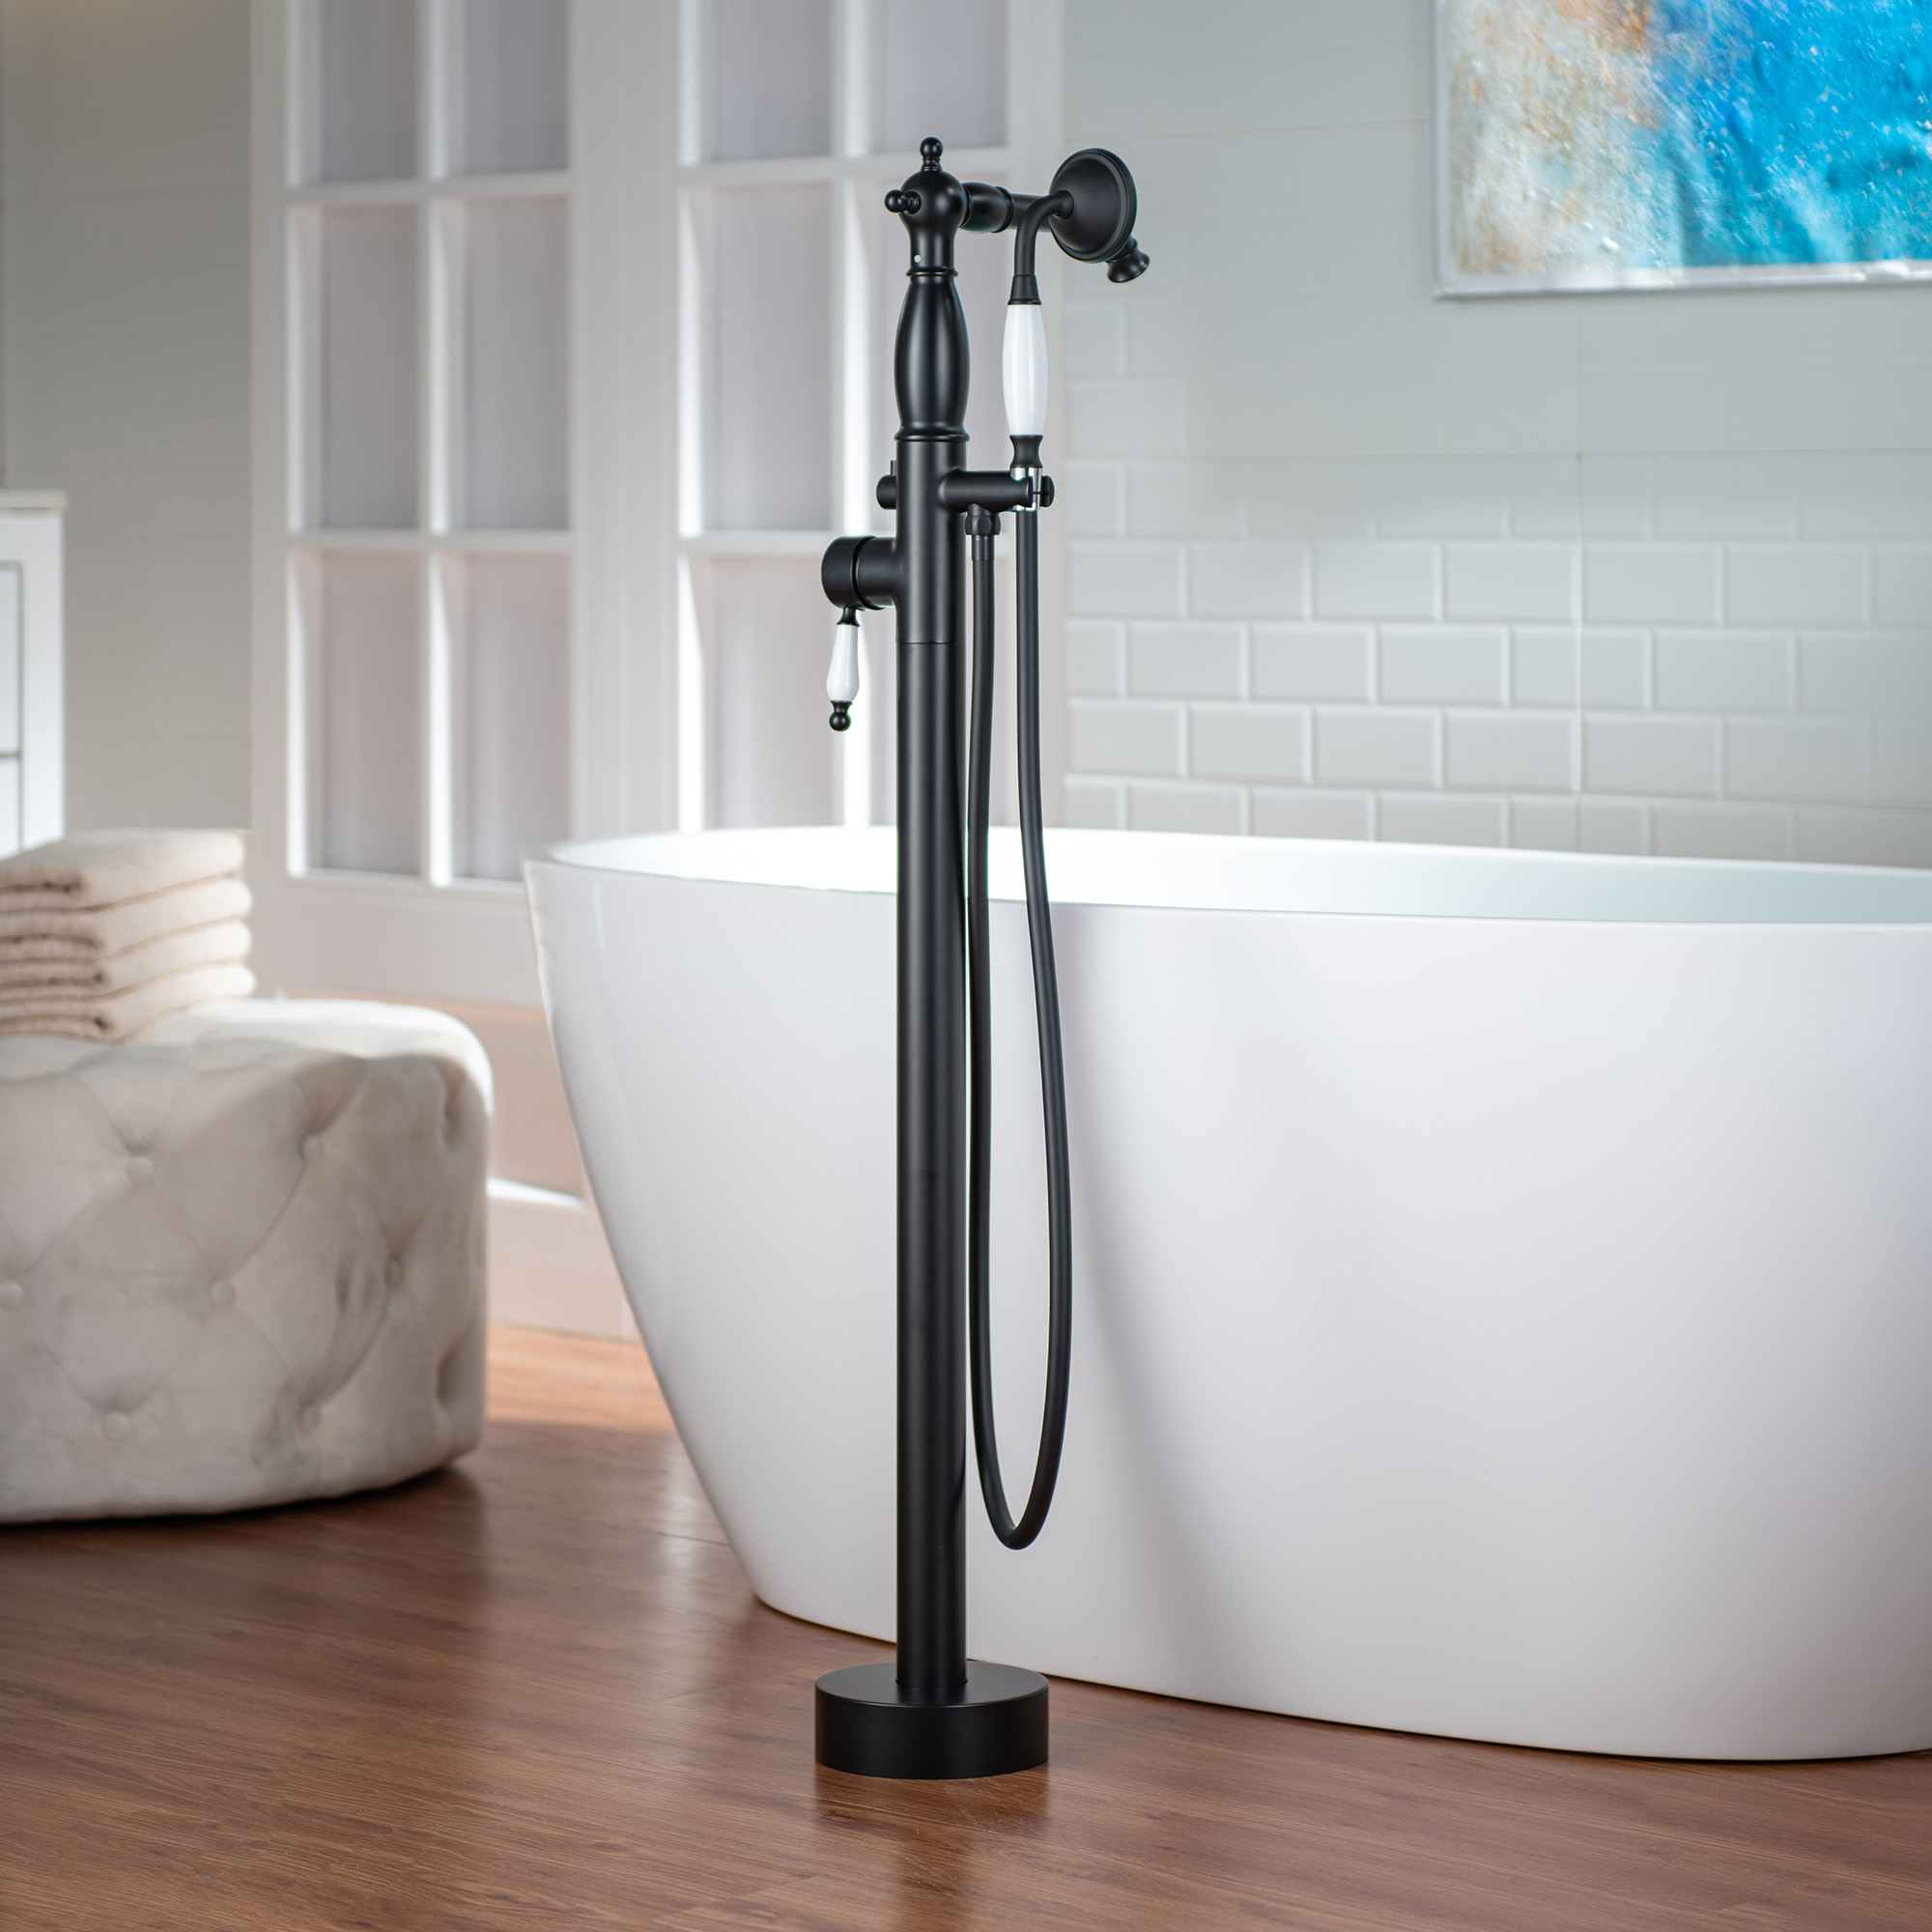  WOODBRIDGE F0048MB Fusion Single Handle Floor Mount Freestanding Tub Filler Faucet with Telephone Hand shower in Matte Black Finish_12271